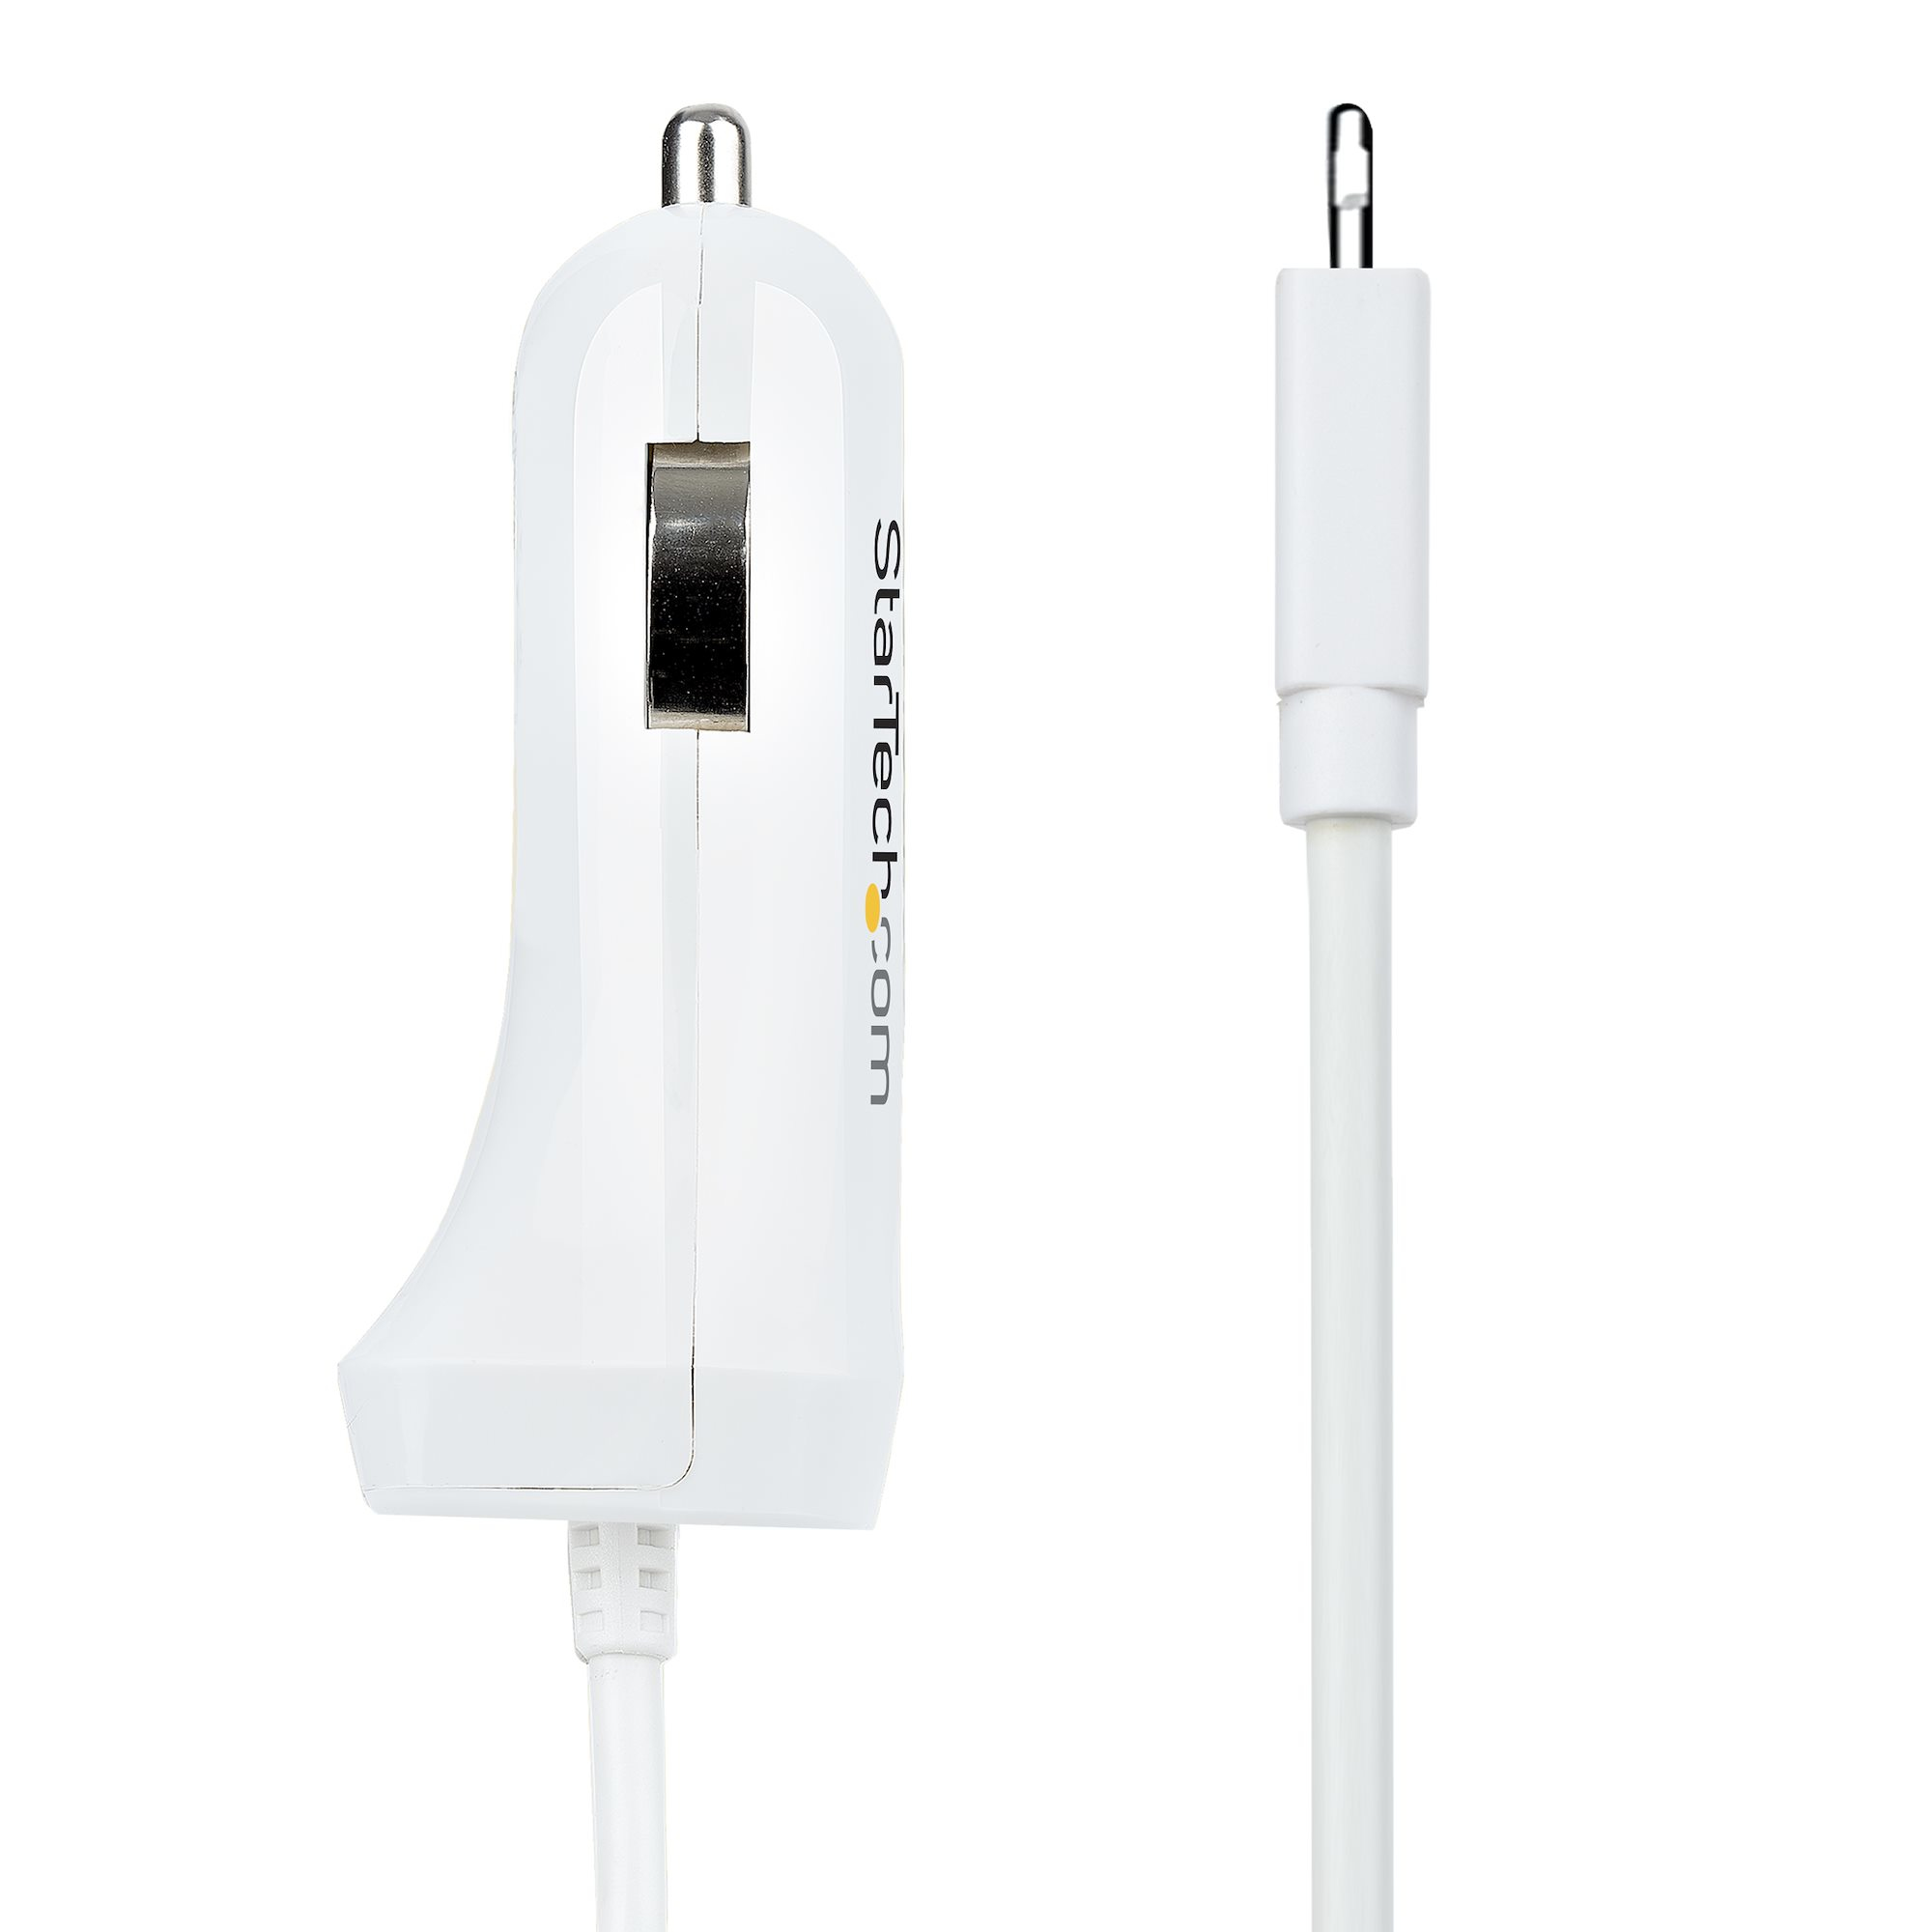 Cable Chargeur Allume Cigare Lightning pour IPHONE 12 ProPort USB Prise  Voiture (BLANC)